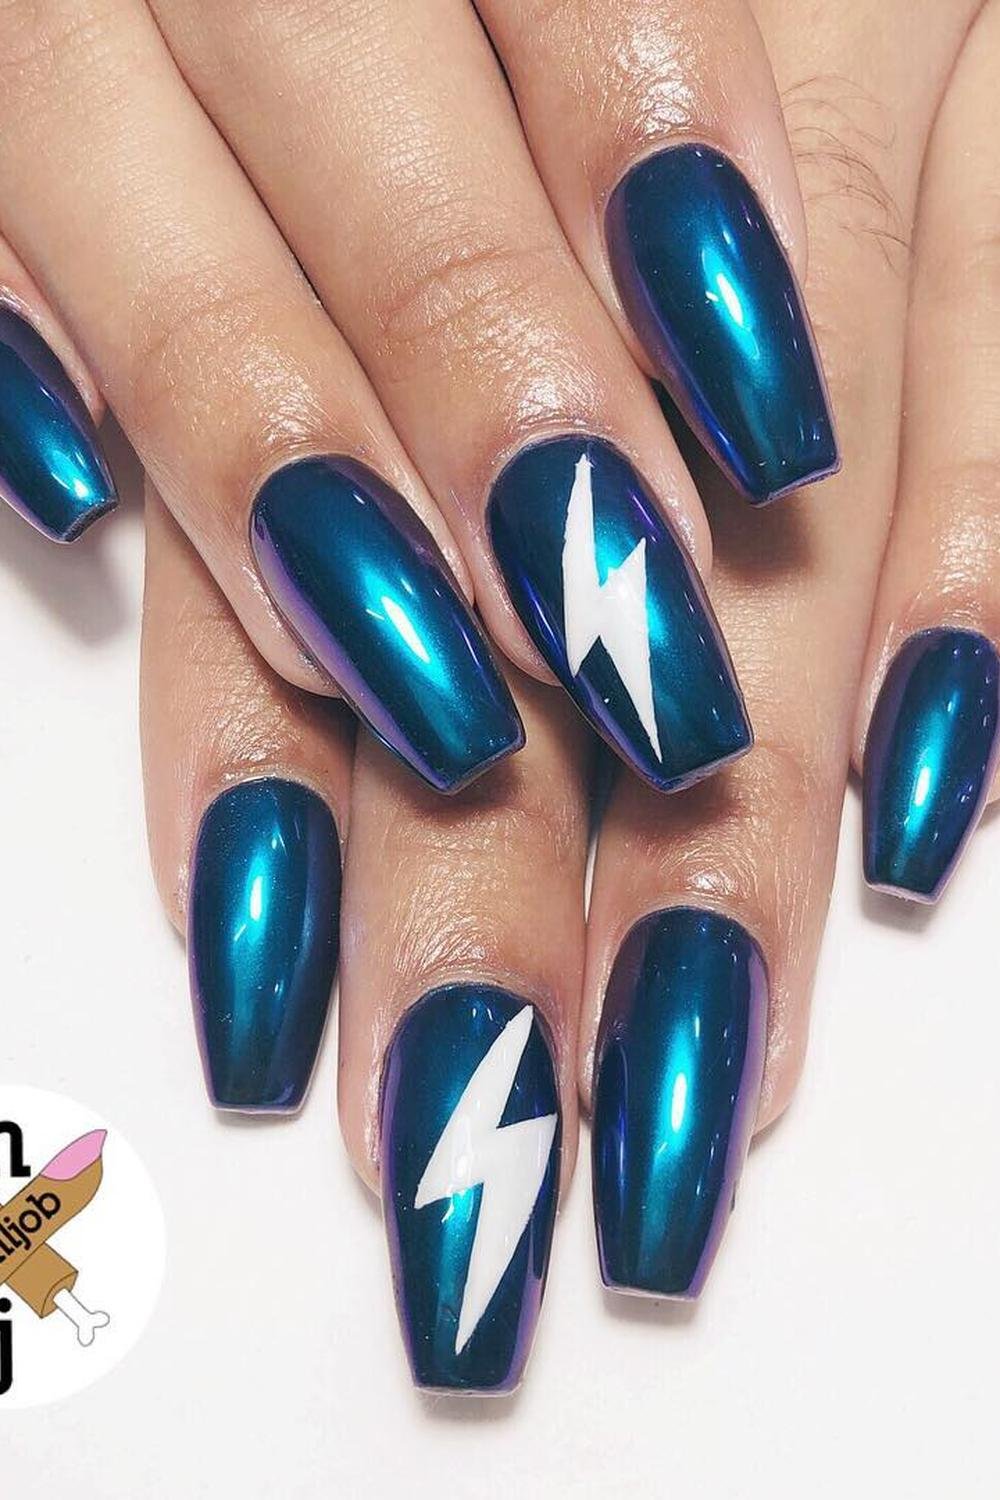 7 - Picture of Blue Chrome Nails